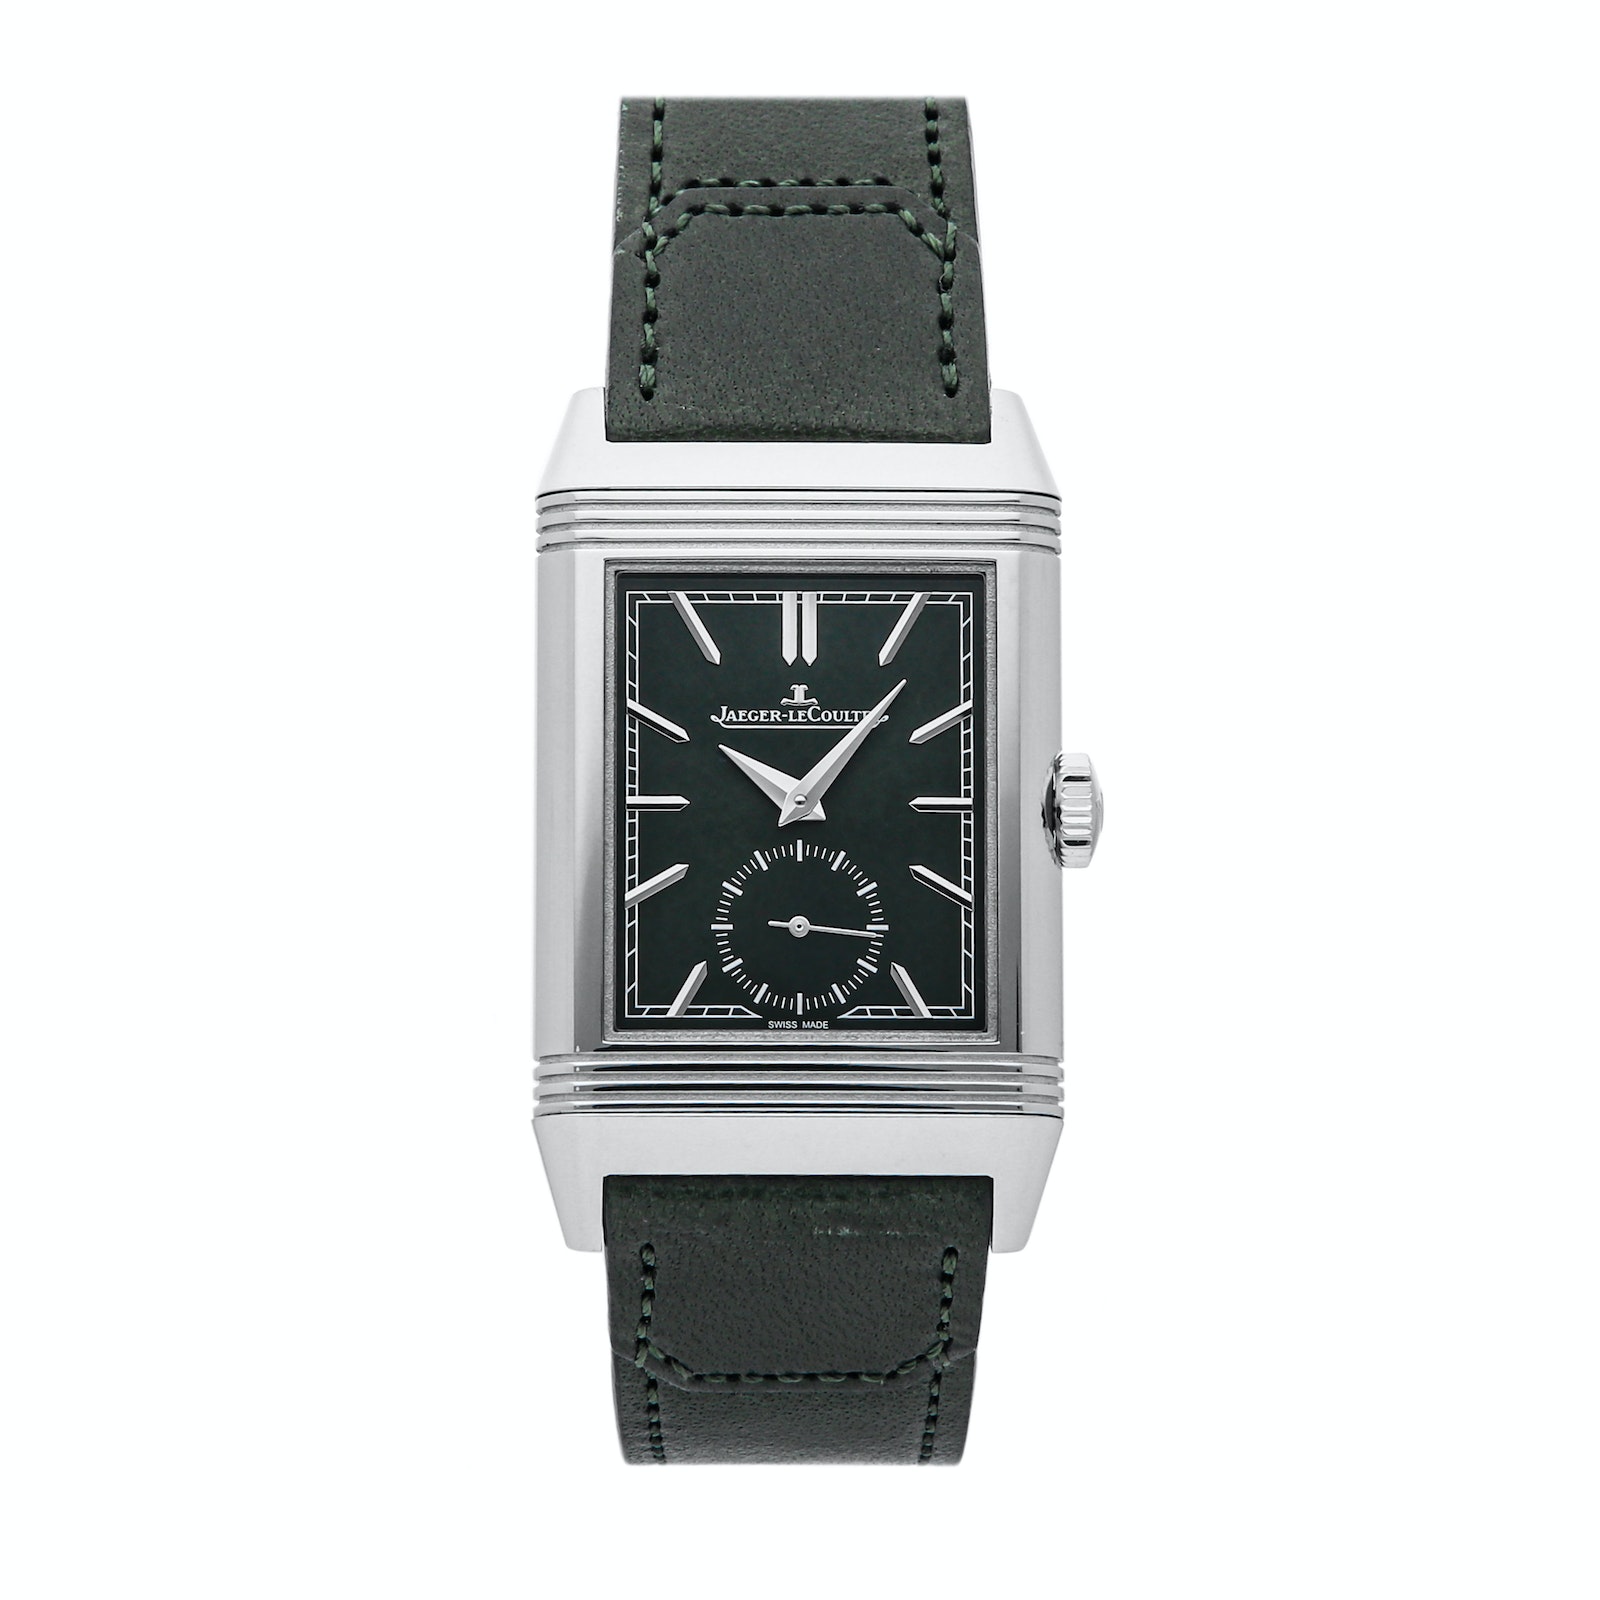 Jaeger-LeCoultre Reverso Tribute Green (3978430) Market Price | WatchCharts